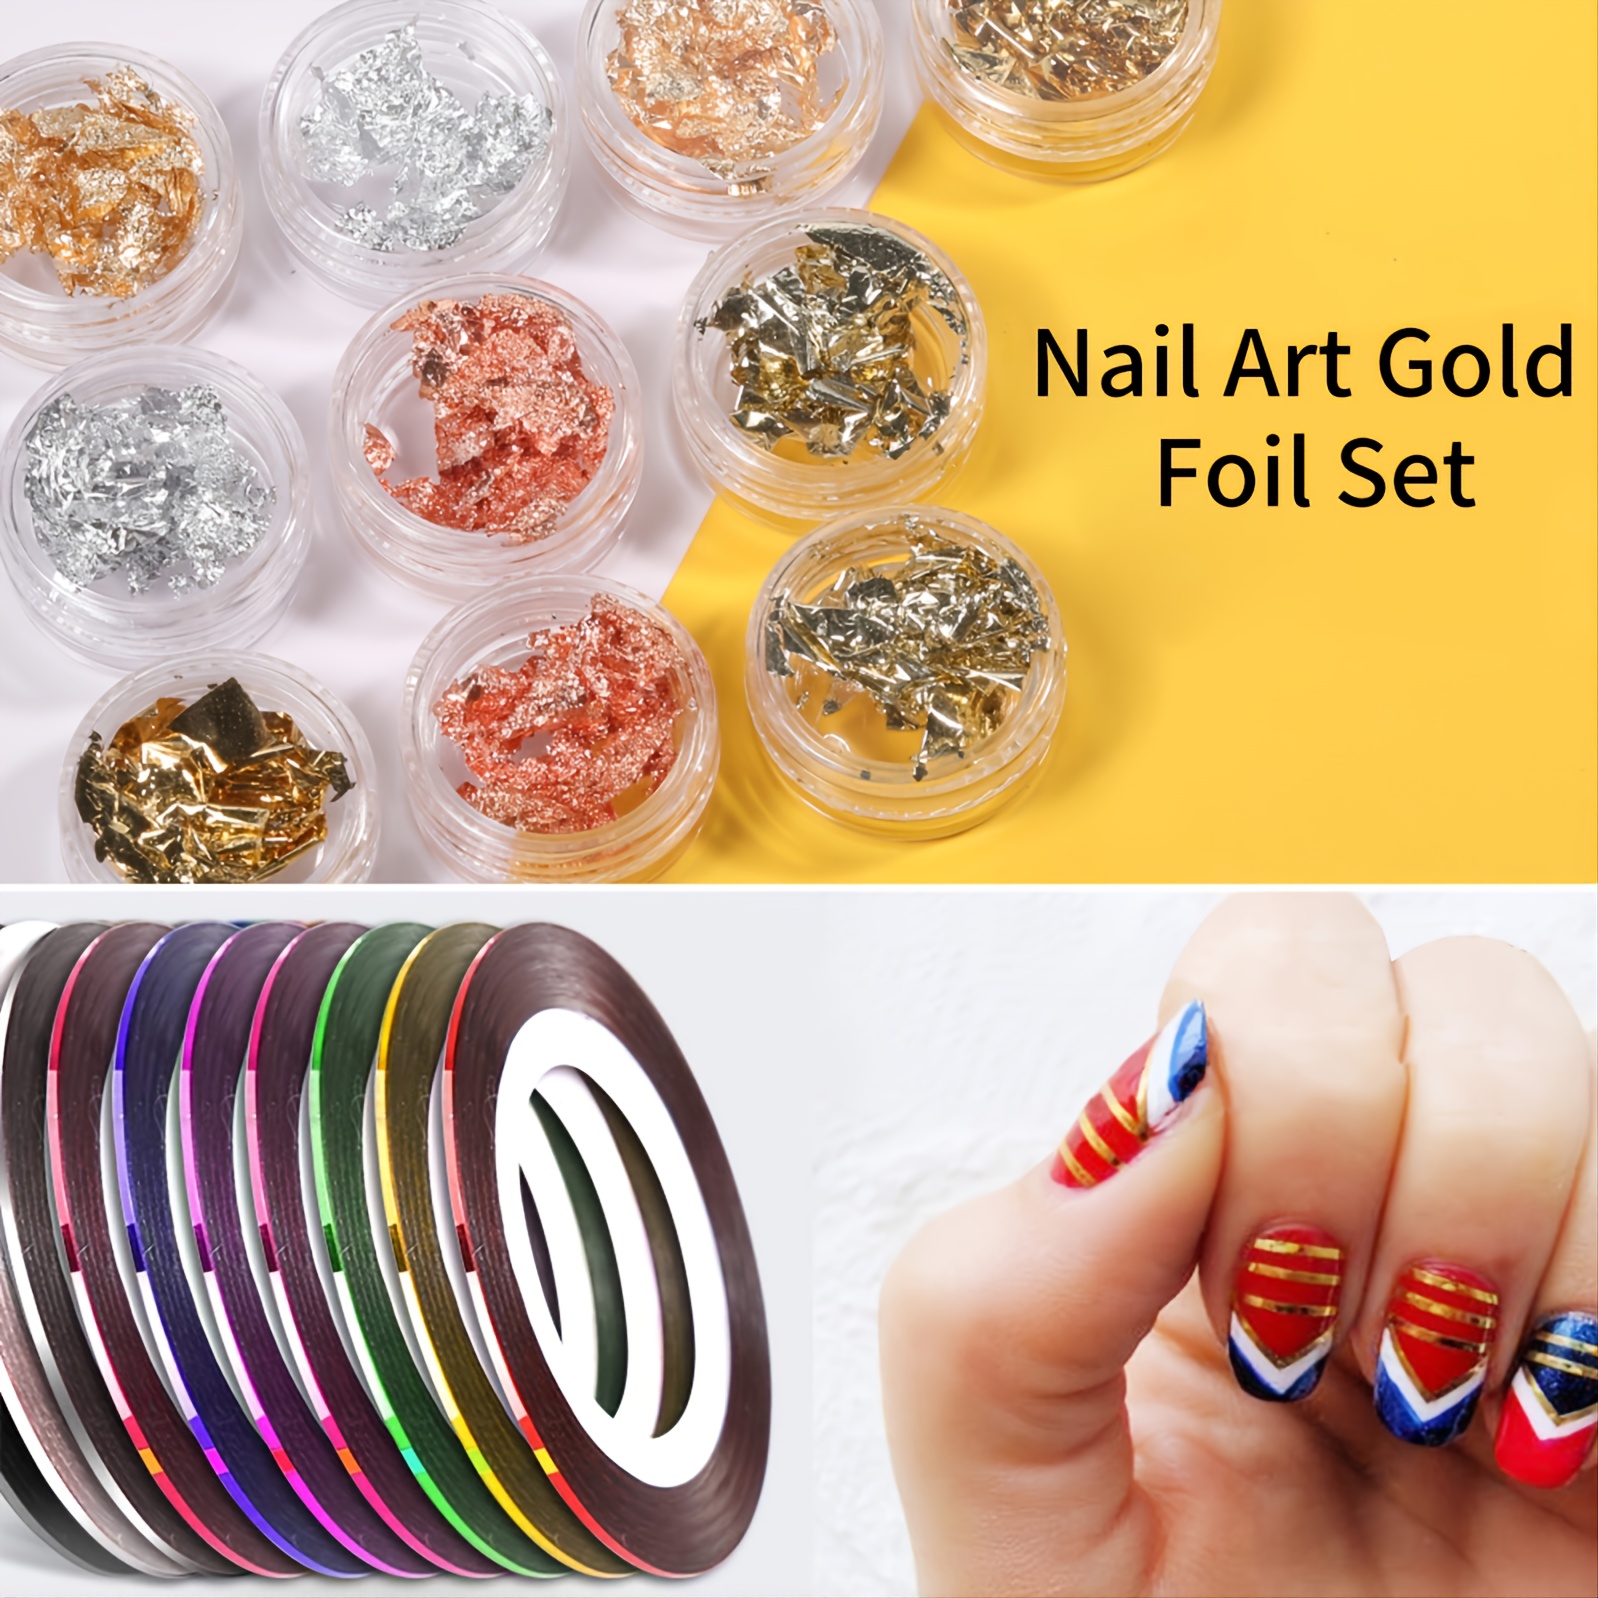 3PCS Wavy Striping Nail Art Tape (2mm) - Metallic Pink, Purple & Silver  (Great for Easter!)